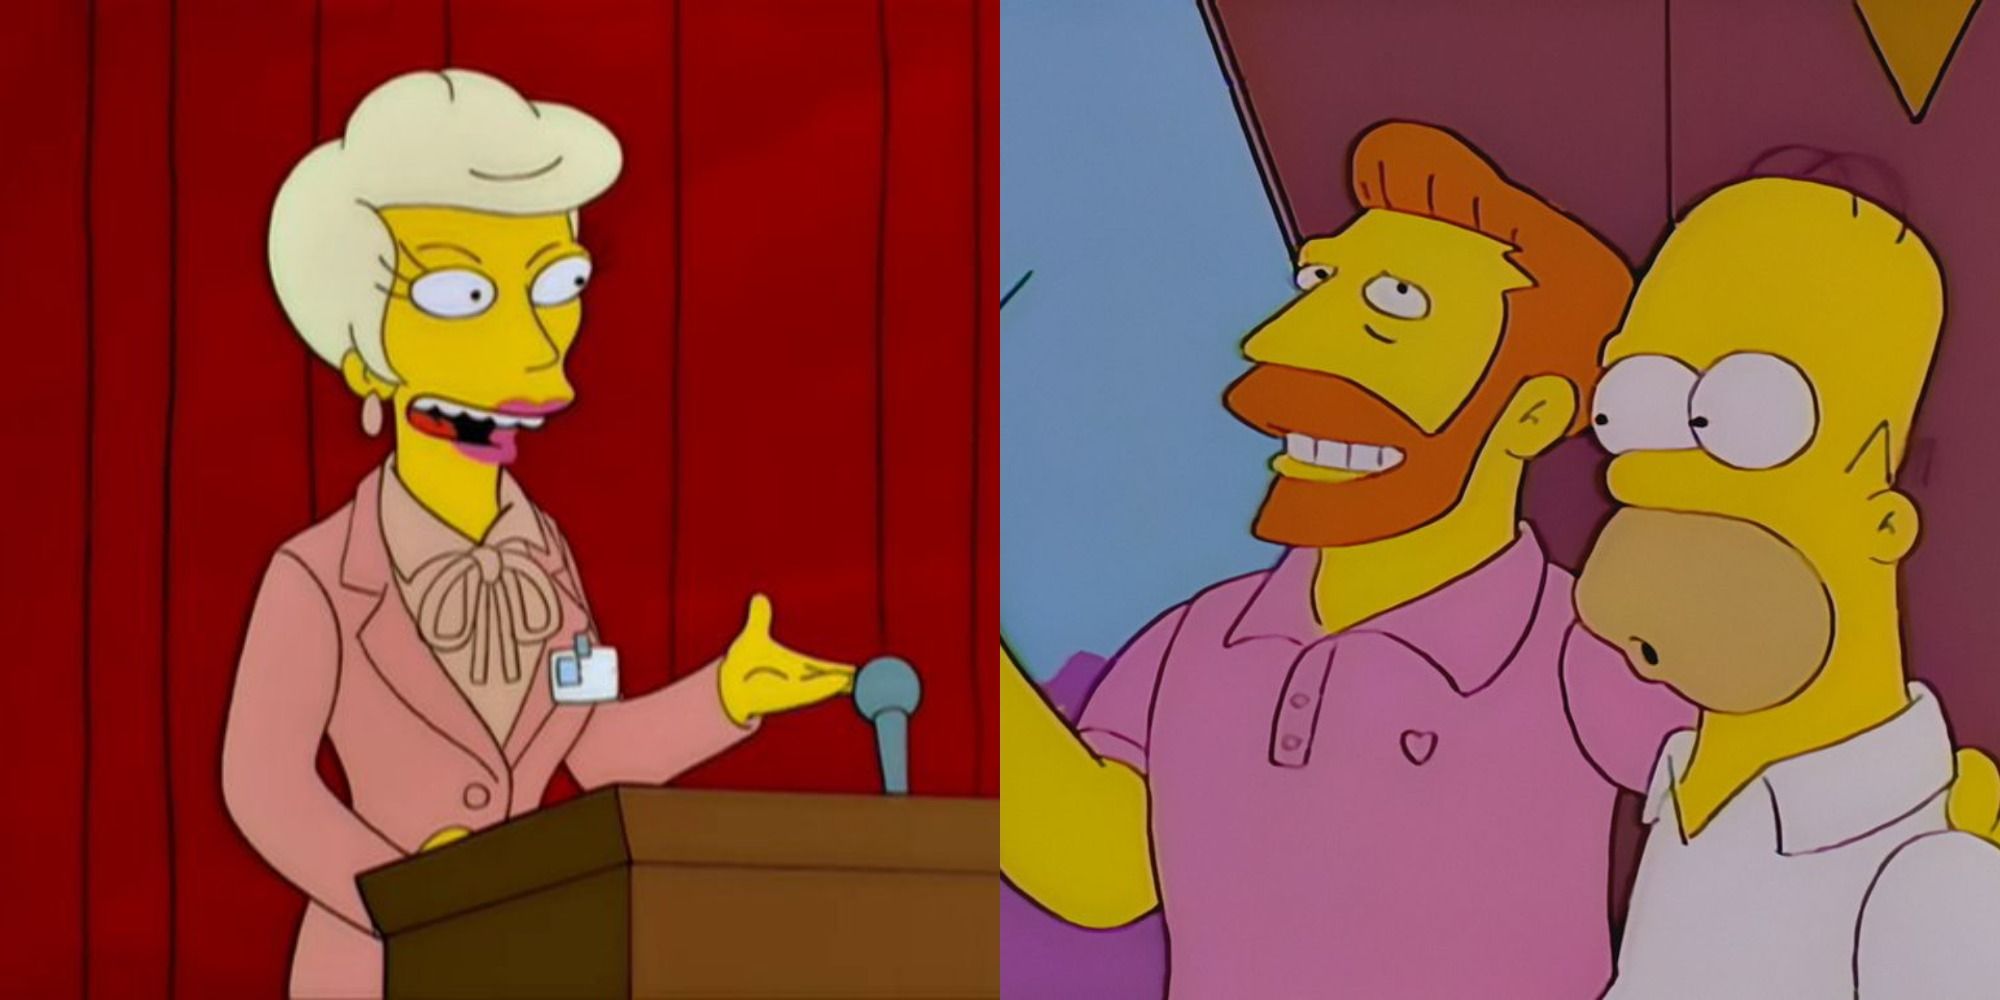 Split image showing Lindsey Naegle giving a speech and Homer and Hank Scorpio in The Simpsons